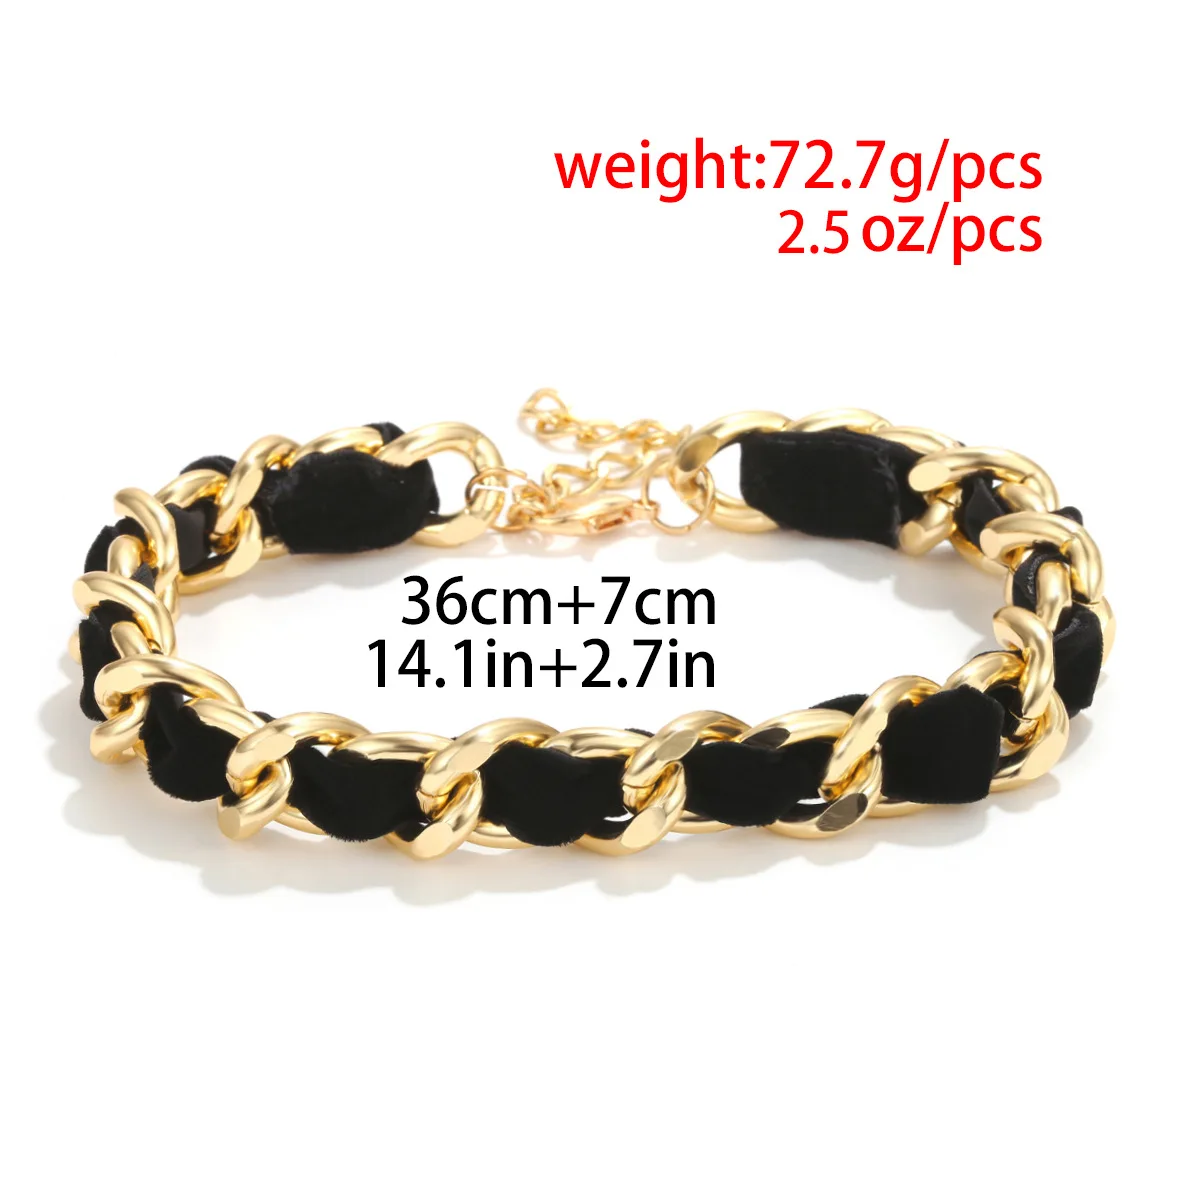 Yiwu simple personality chain velvet retro necklace braided gold chunky choker necklace women